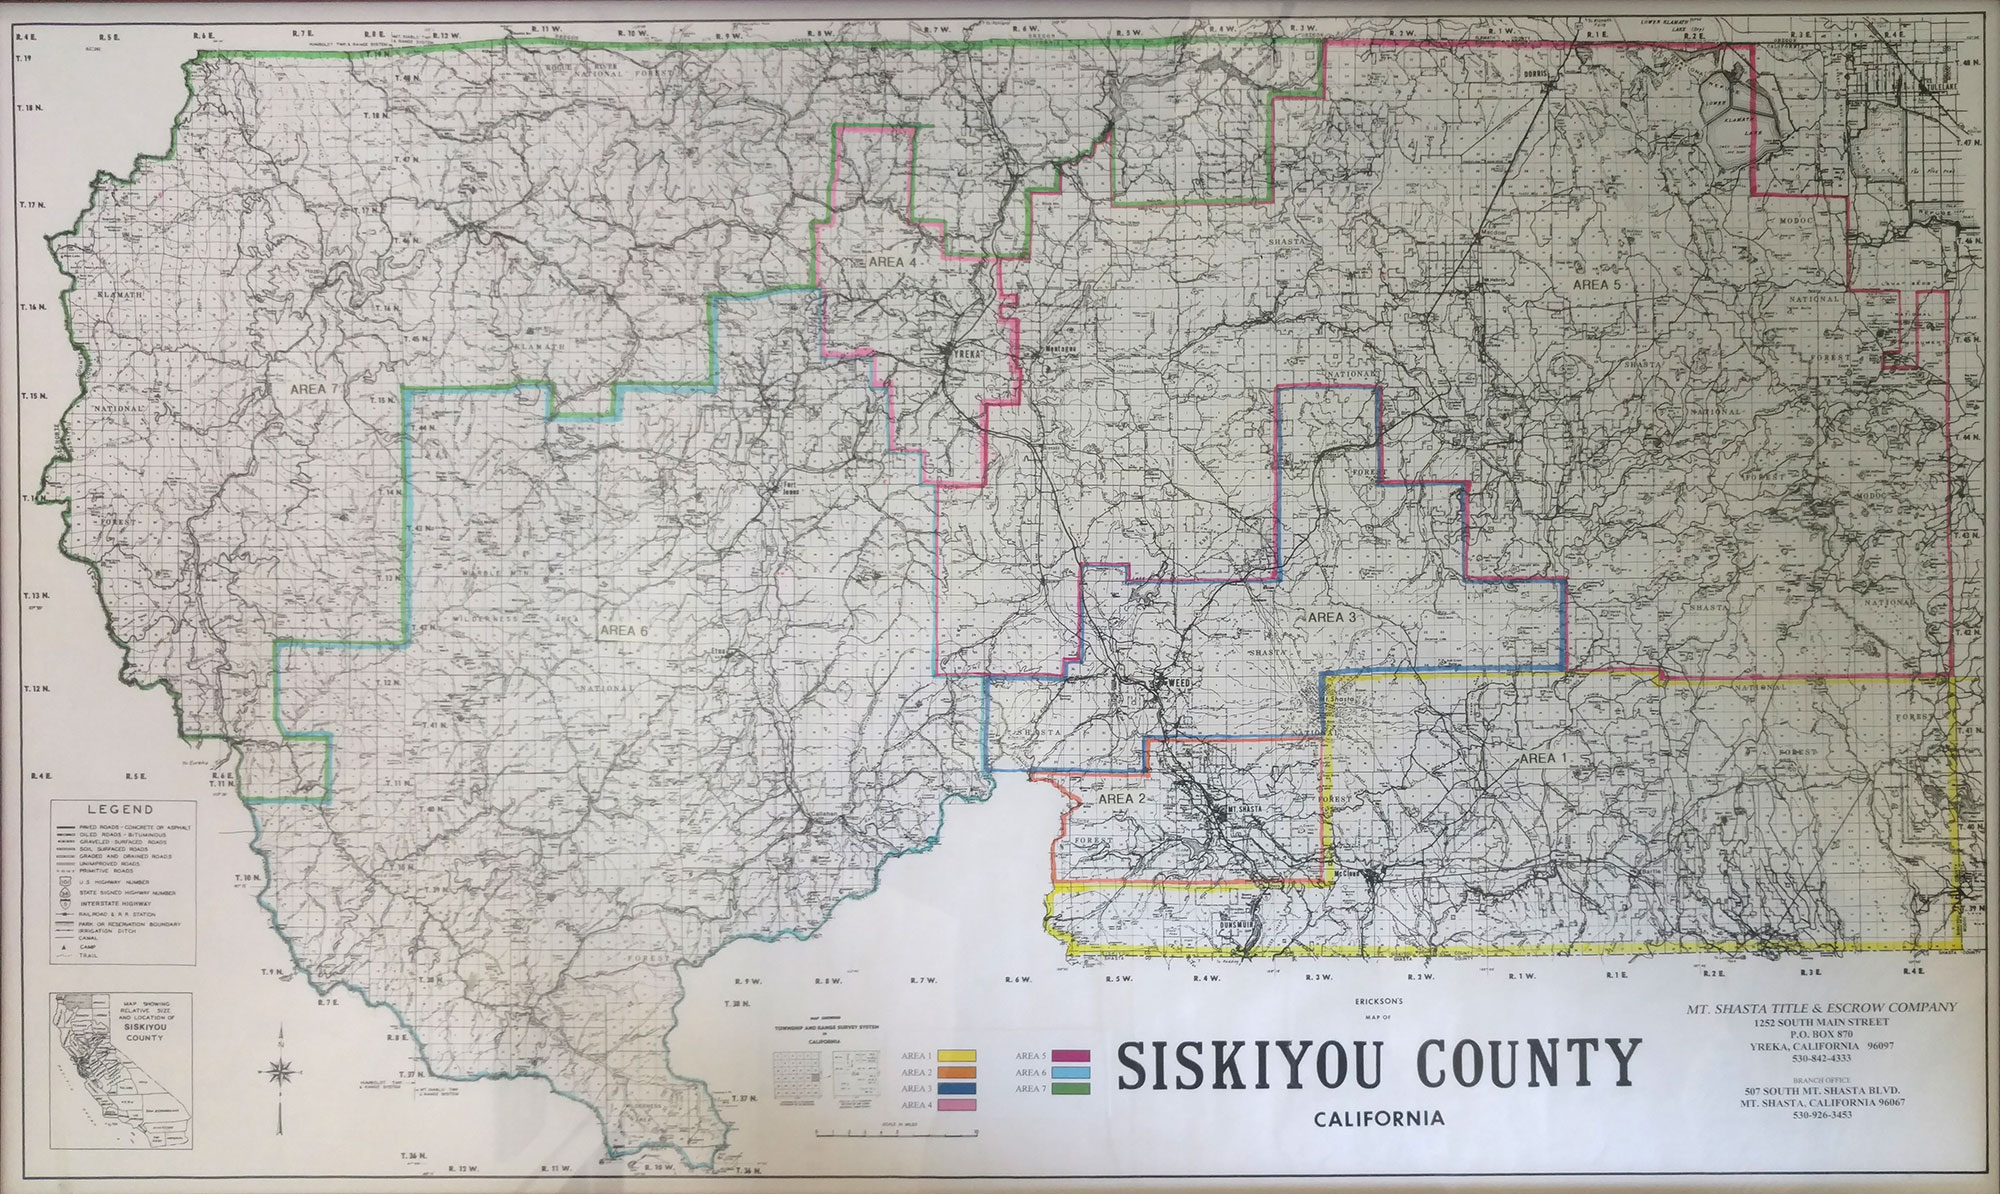 Trustee Areas Map of Siskiyou County